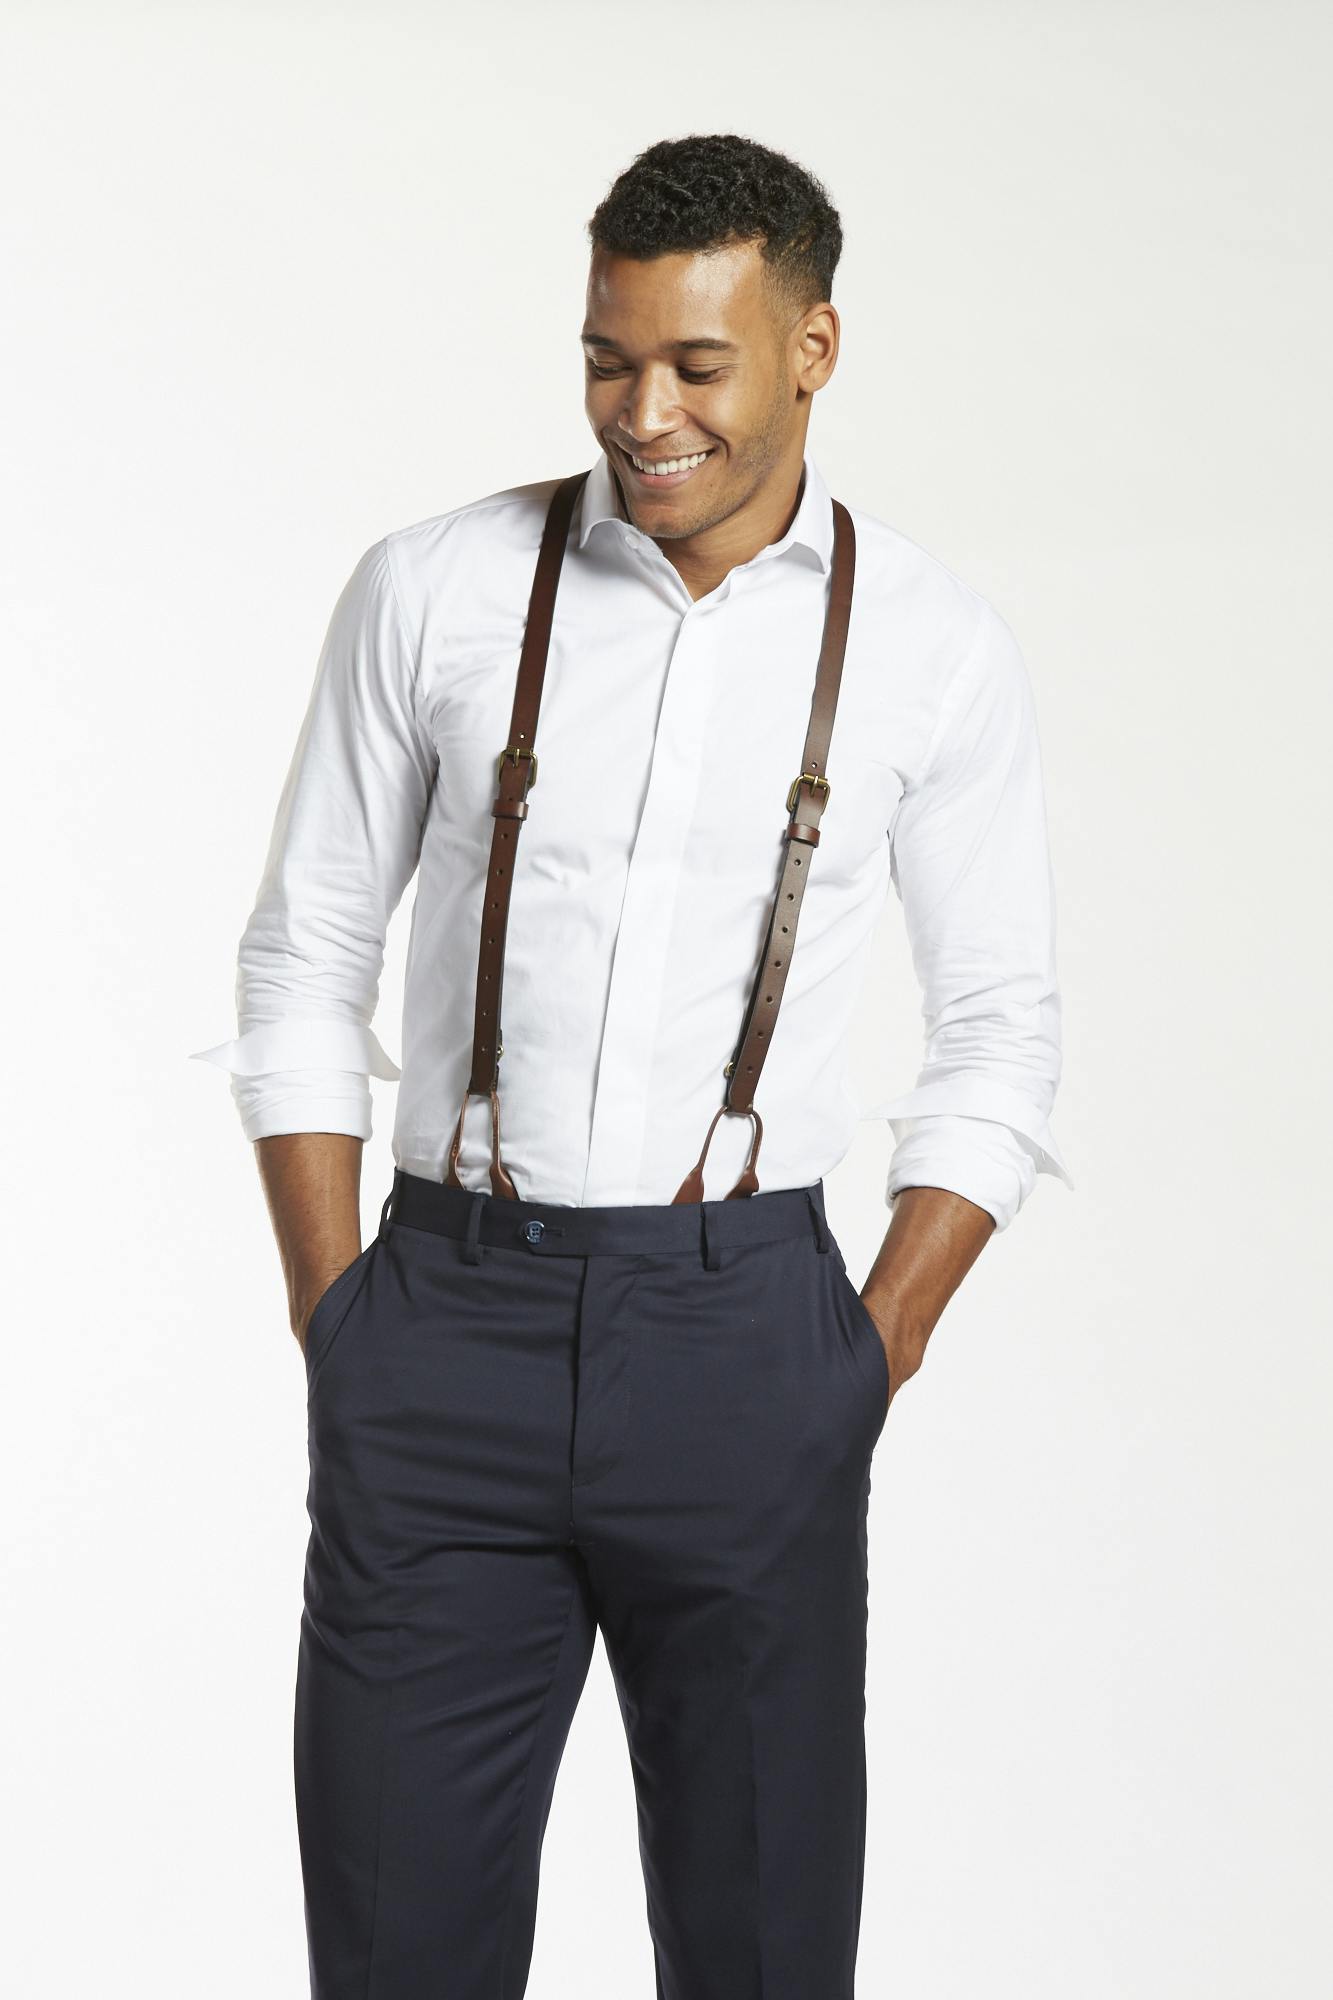 There Can Only Be One: Belt vs. Suspenders